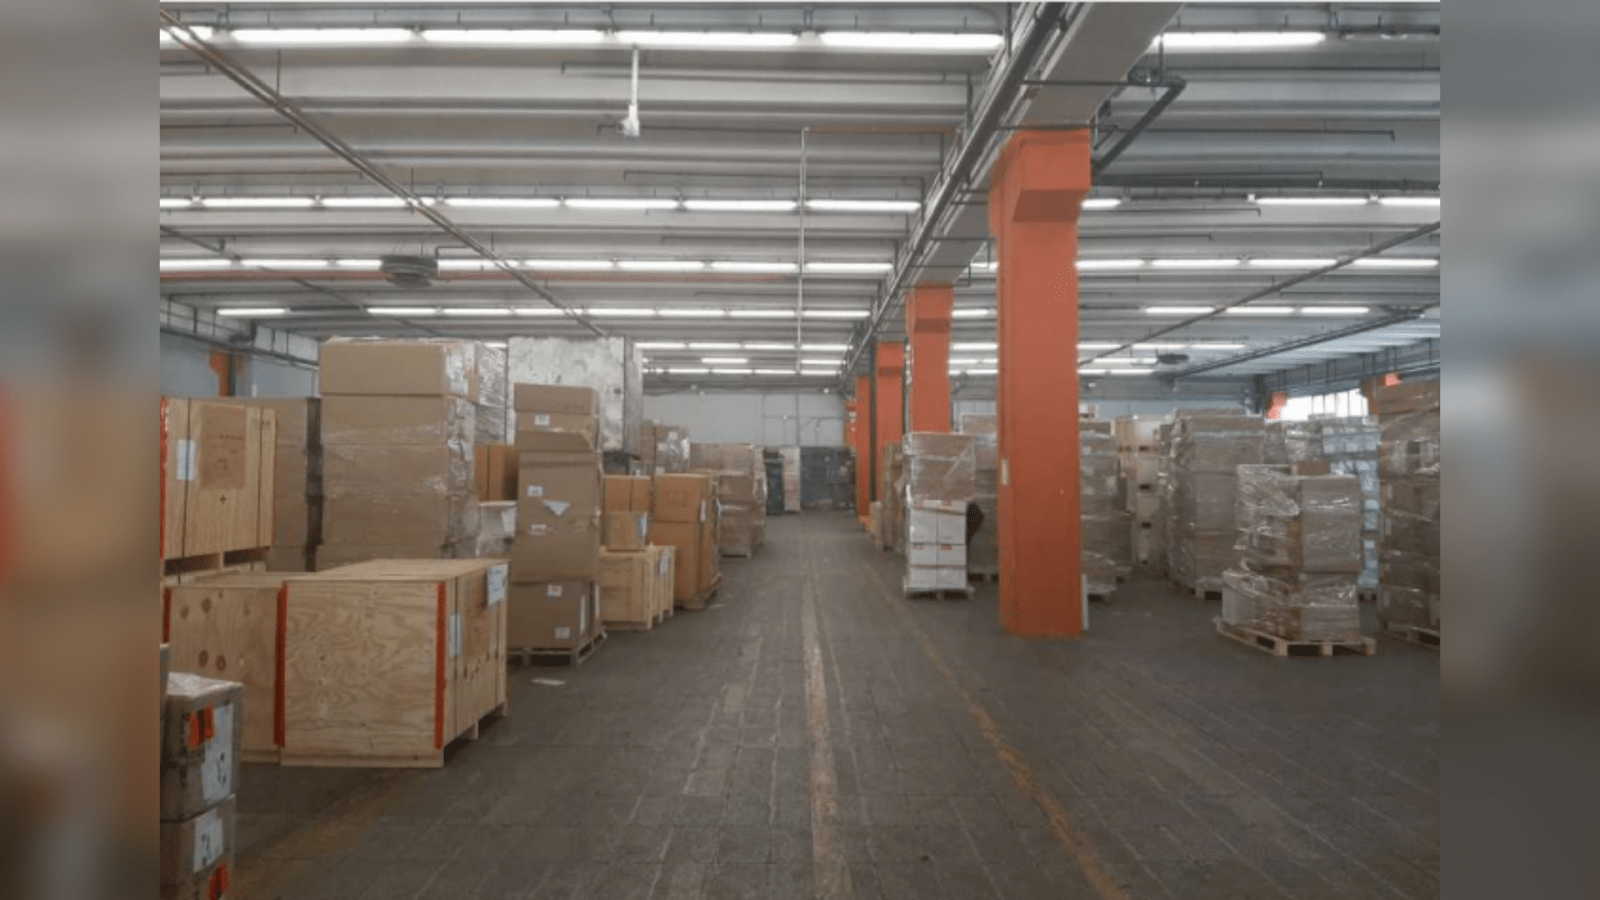 OUR SERVICES  Our Milan Branch offers:  - A wearhouse;  -Customs Office;  -Loading bays and a fleet of trucks;  -X Ray machine;  -A wood shop;  -Everything needed for the airfreight pallettizing;  - A refrigereted cell.